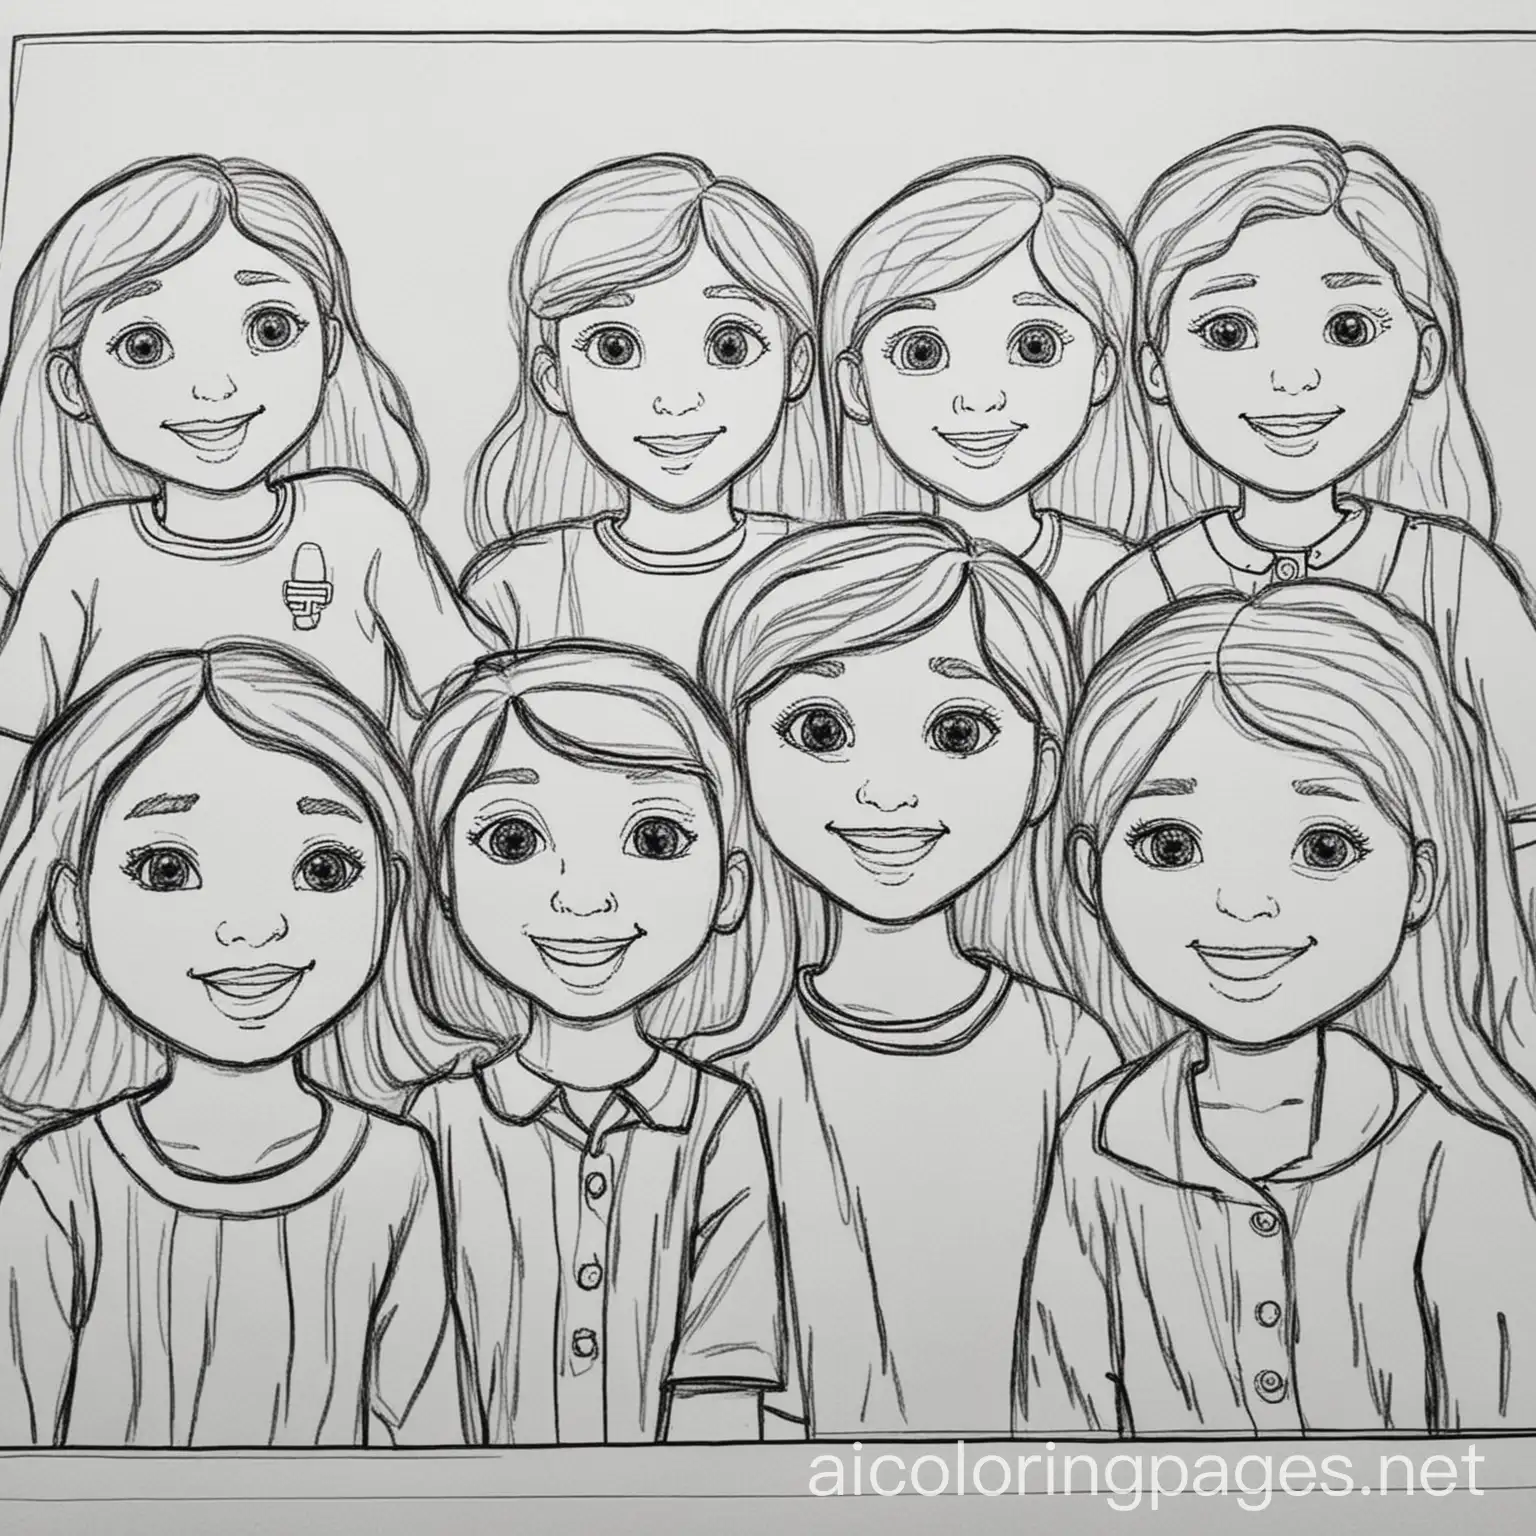 A group of 5th graders, Coloring Page, black and white, line art, white background, Simplicity, Ample White Space. The background of the coloring page is plain white to make it easy for young children to color within the lines. The outlines of all the subjects are easy to distinguish, making it simple for kids to color without too much difficulty